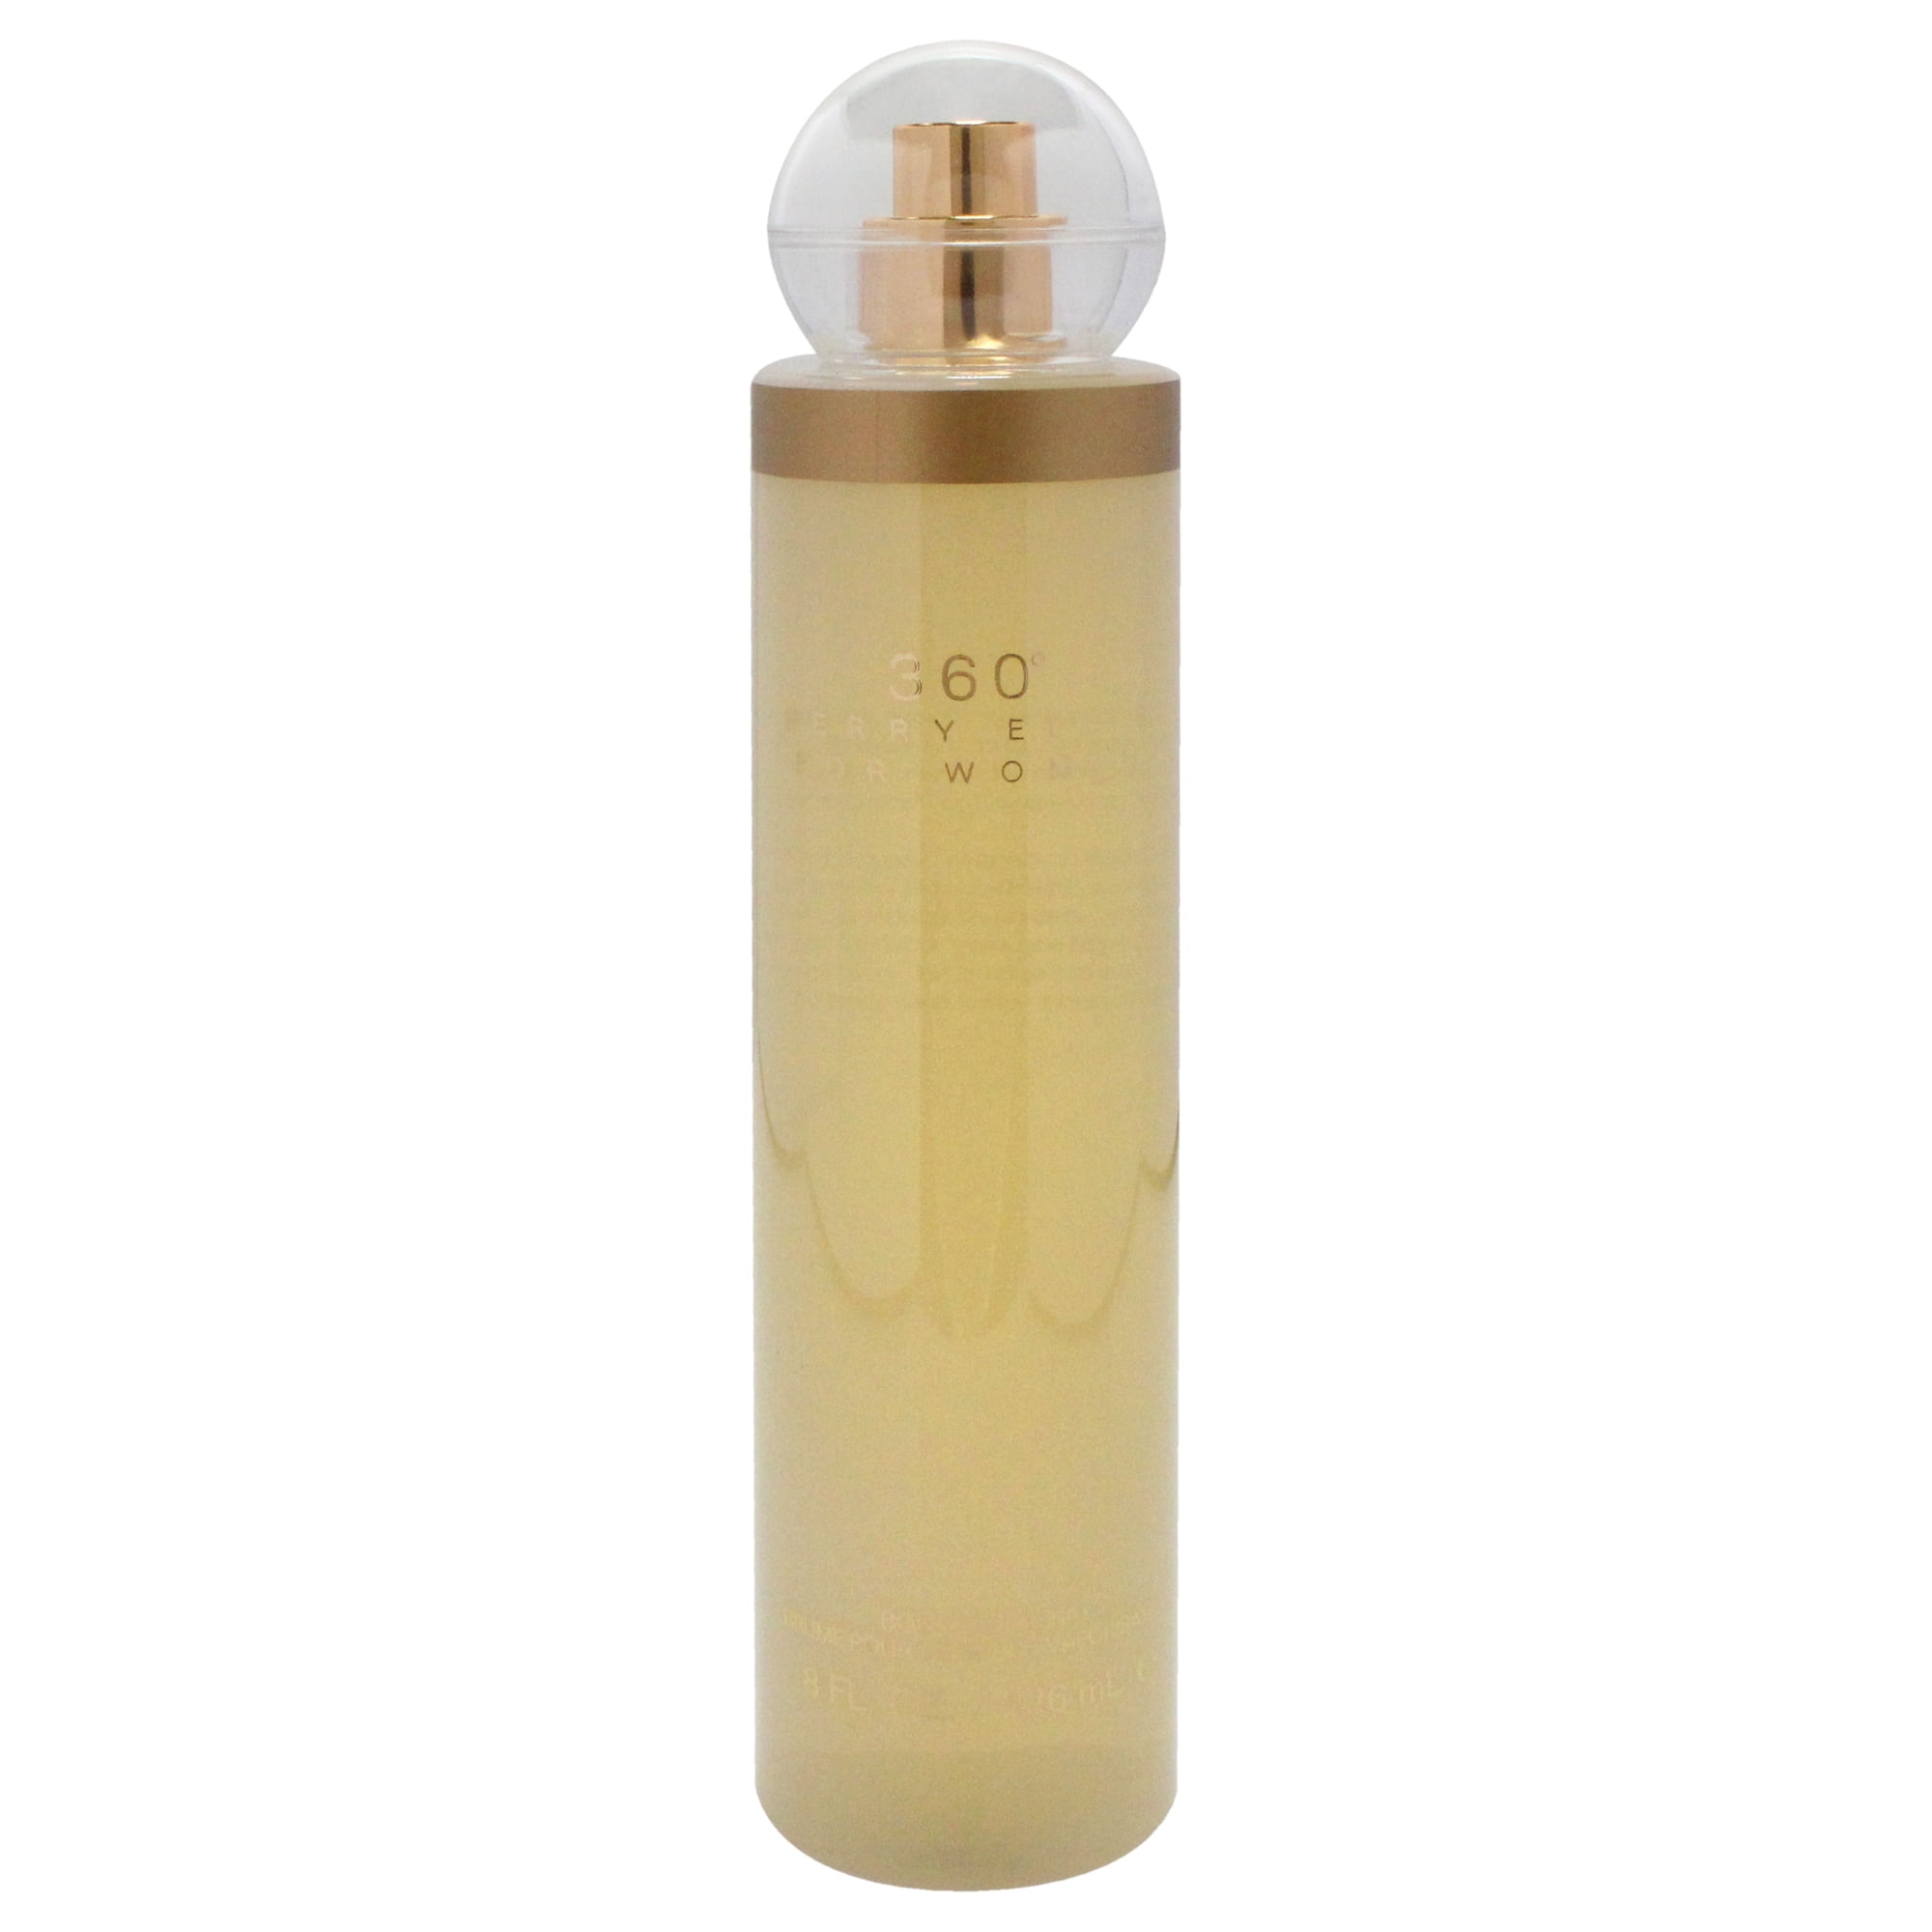 360 for Women 8.0 fl oz Body Mist By Perry Ellis (Pack of 2)